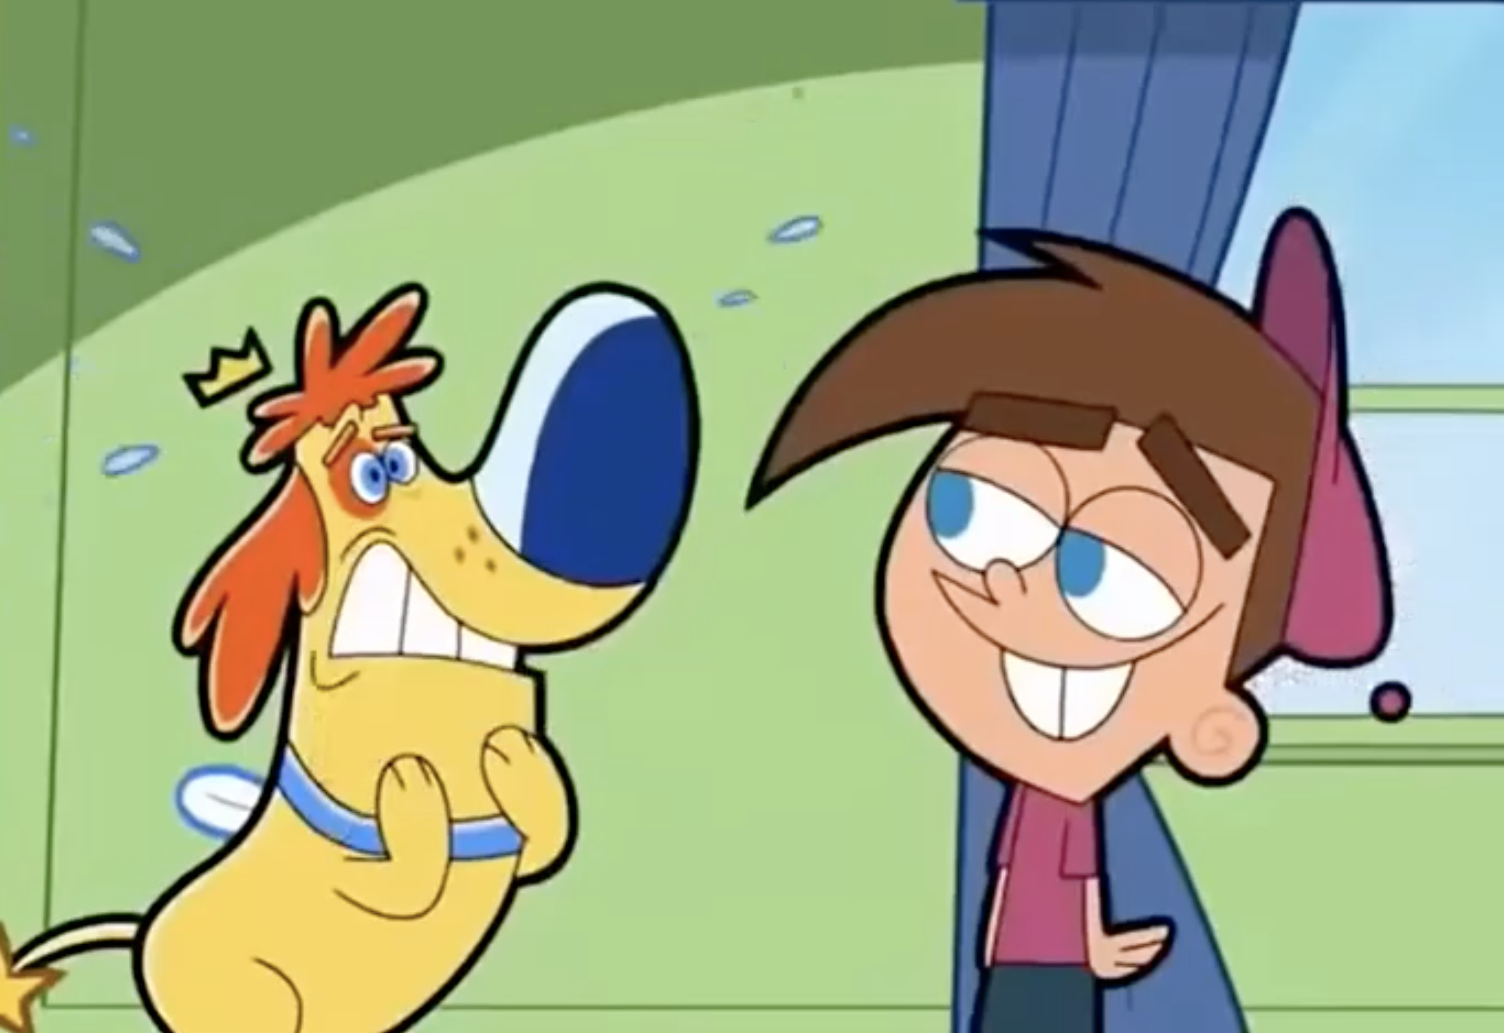 Timmy and Sparky